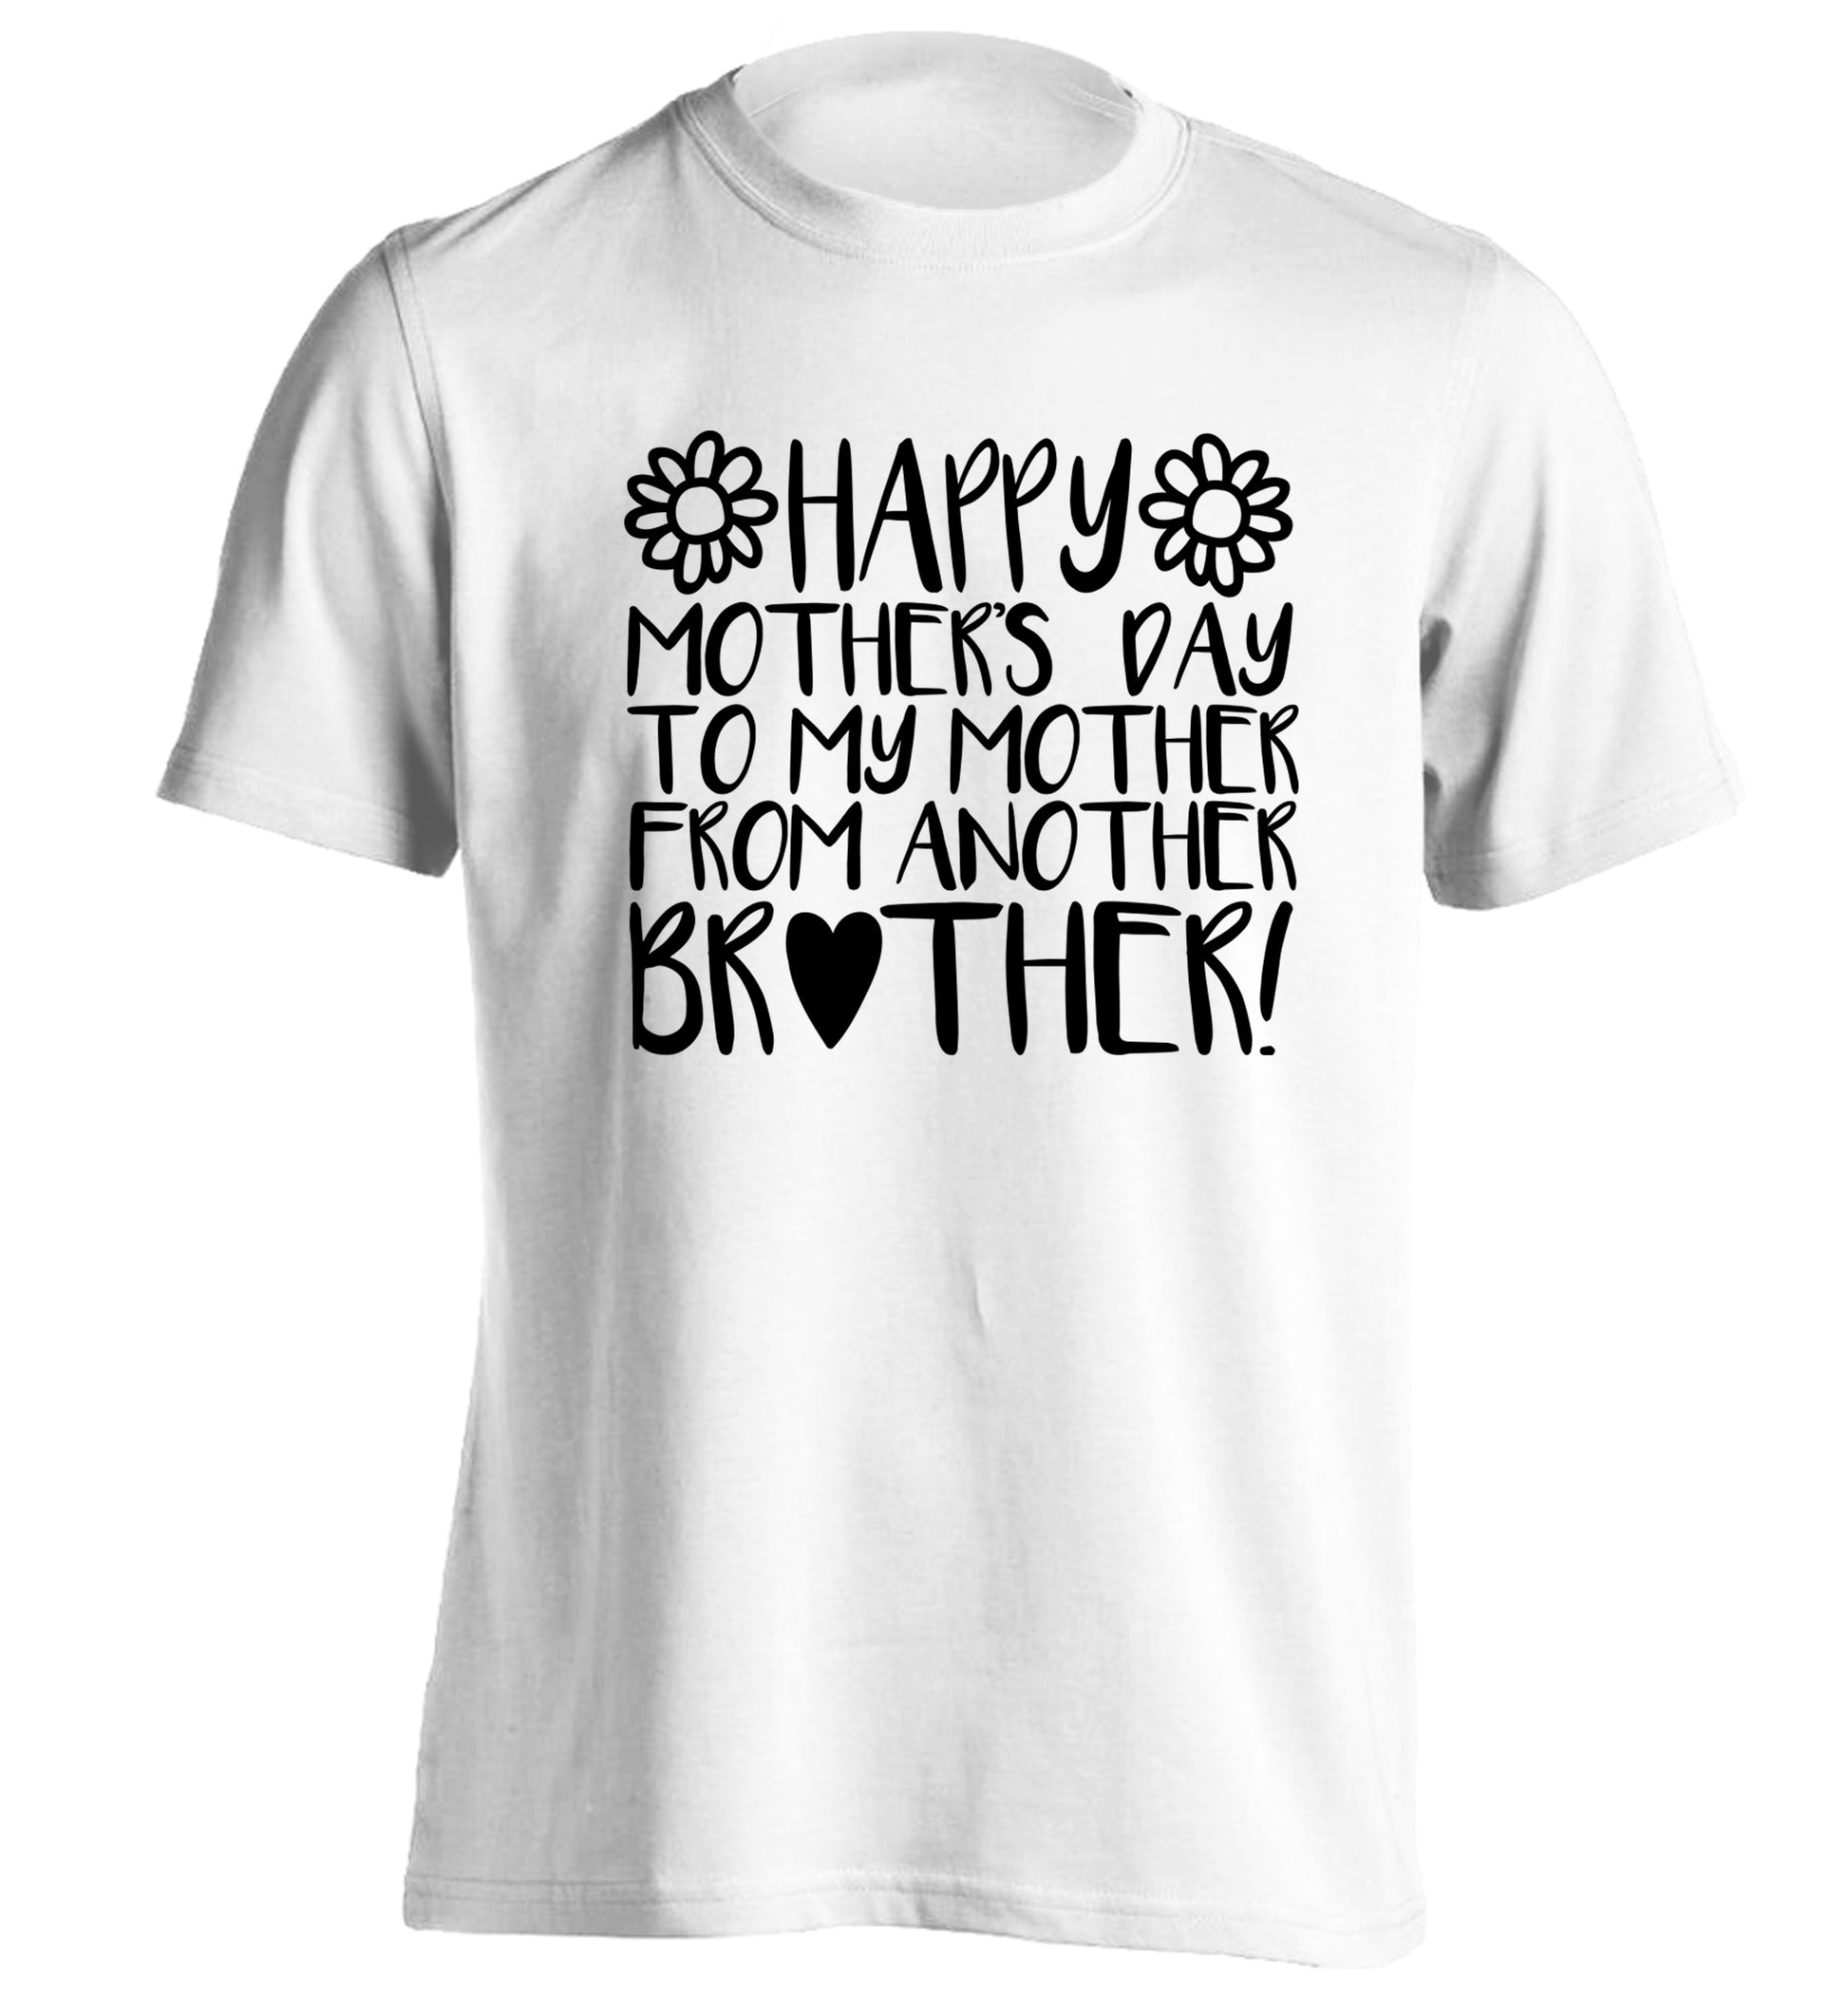 Happy mother's day to my mother from another brother adults unisex white Tshirt 2XL